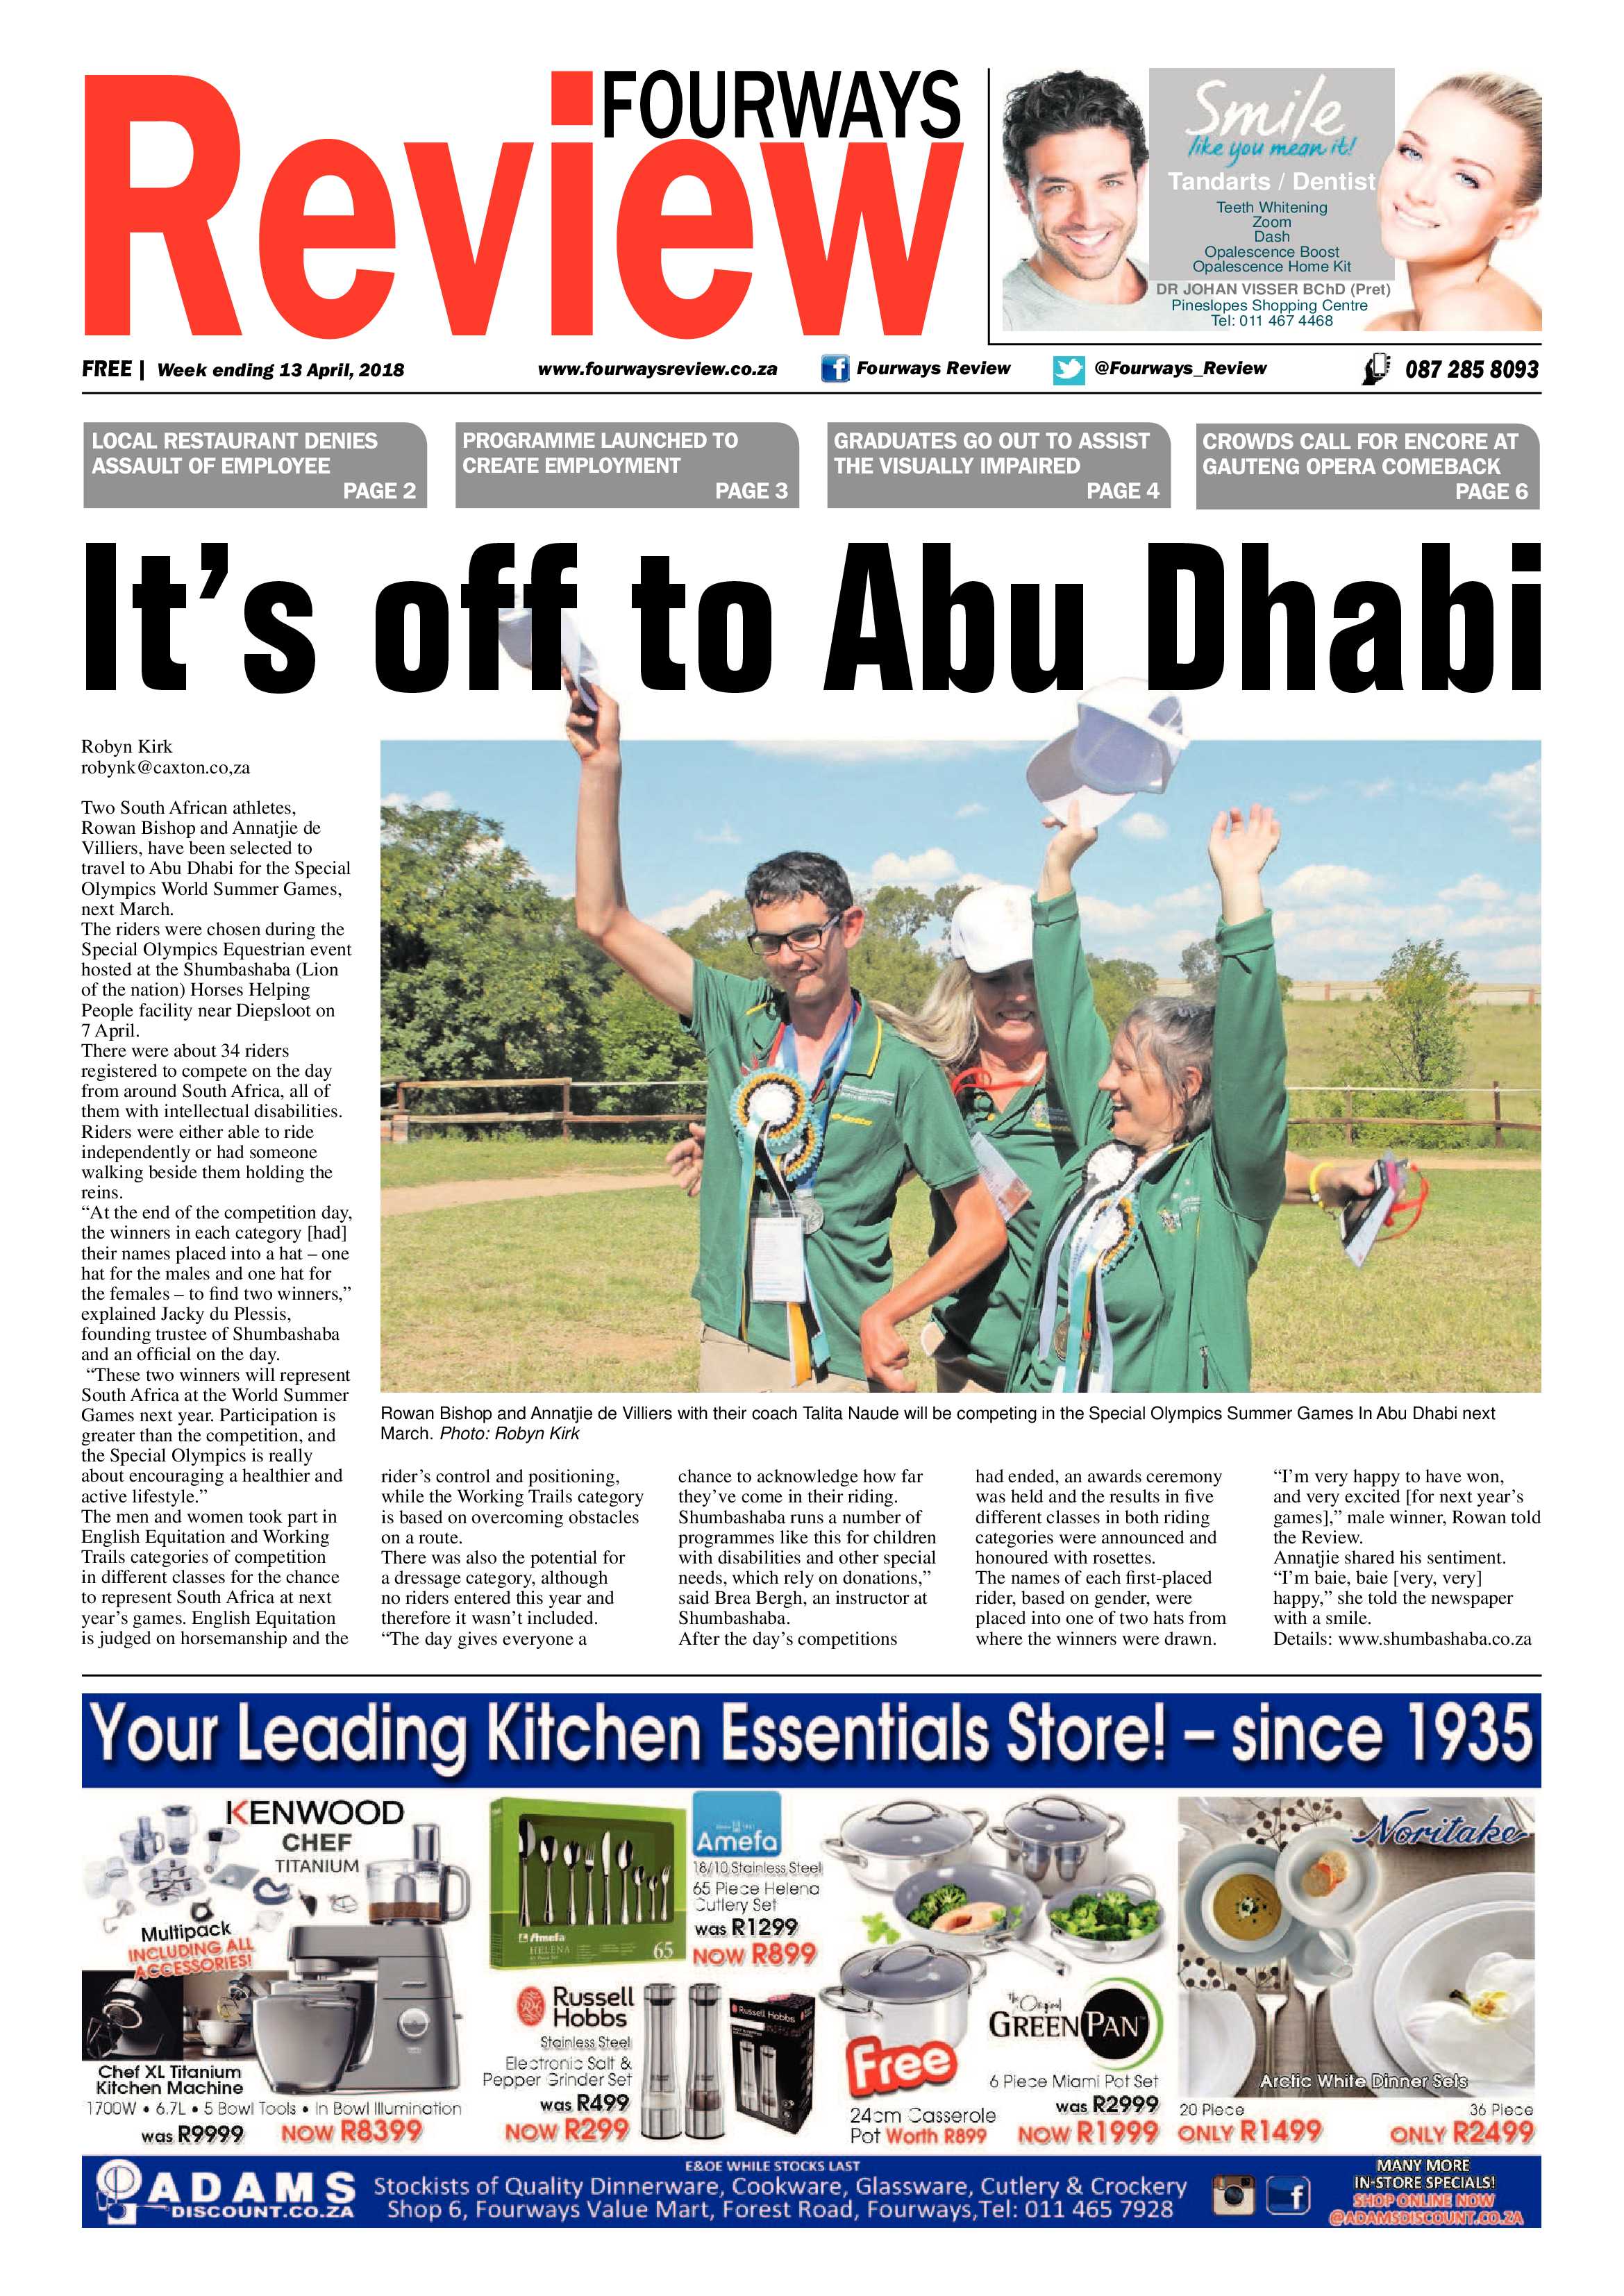 Fourways Review 13 April 2018 page 1